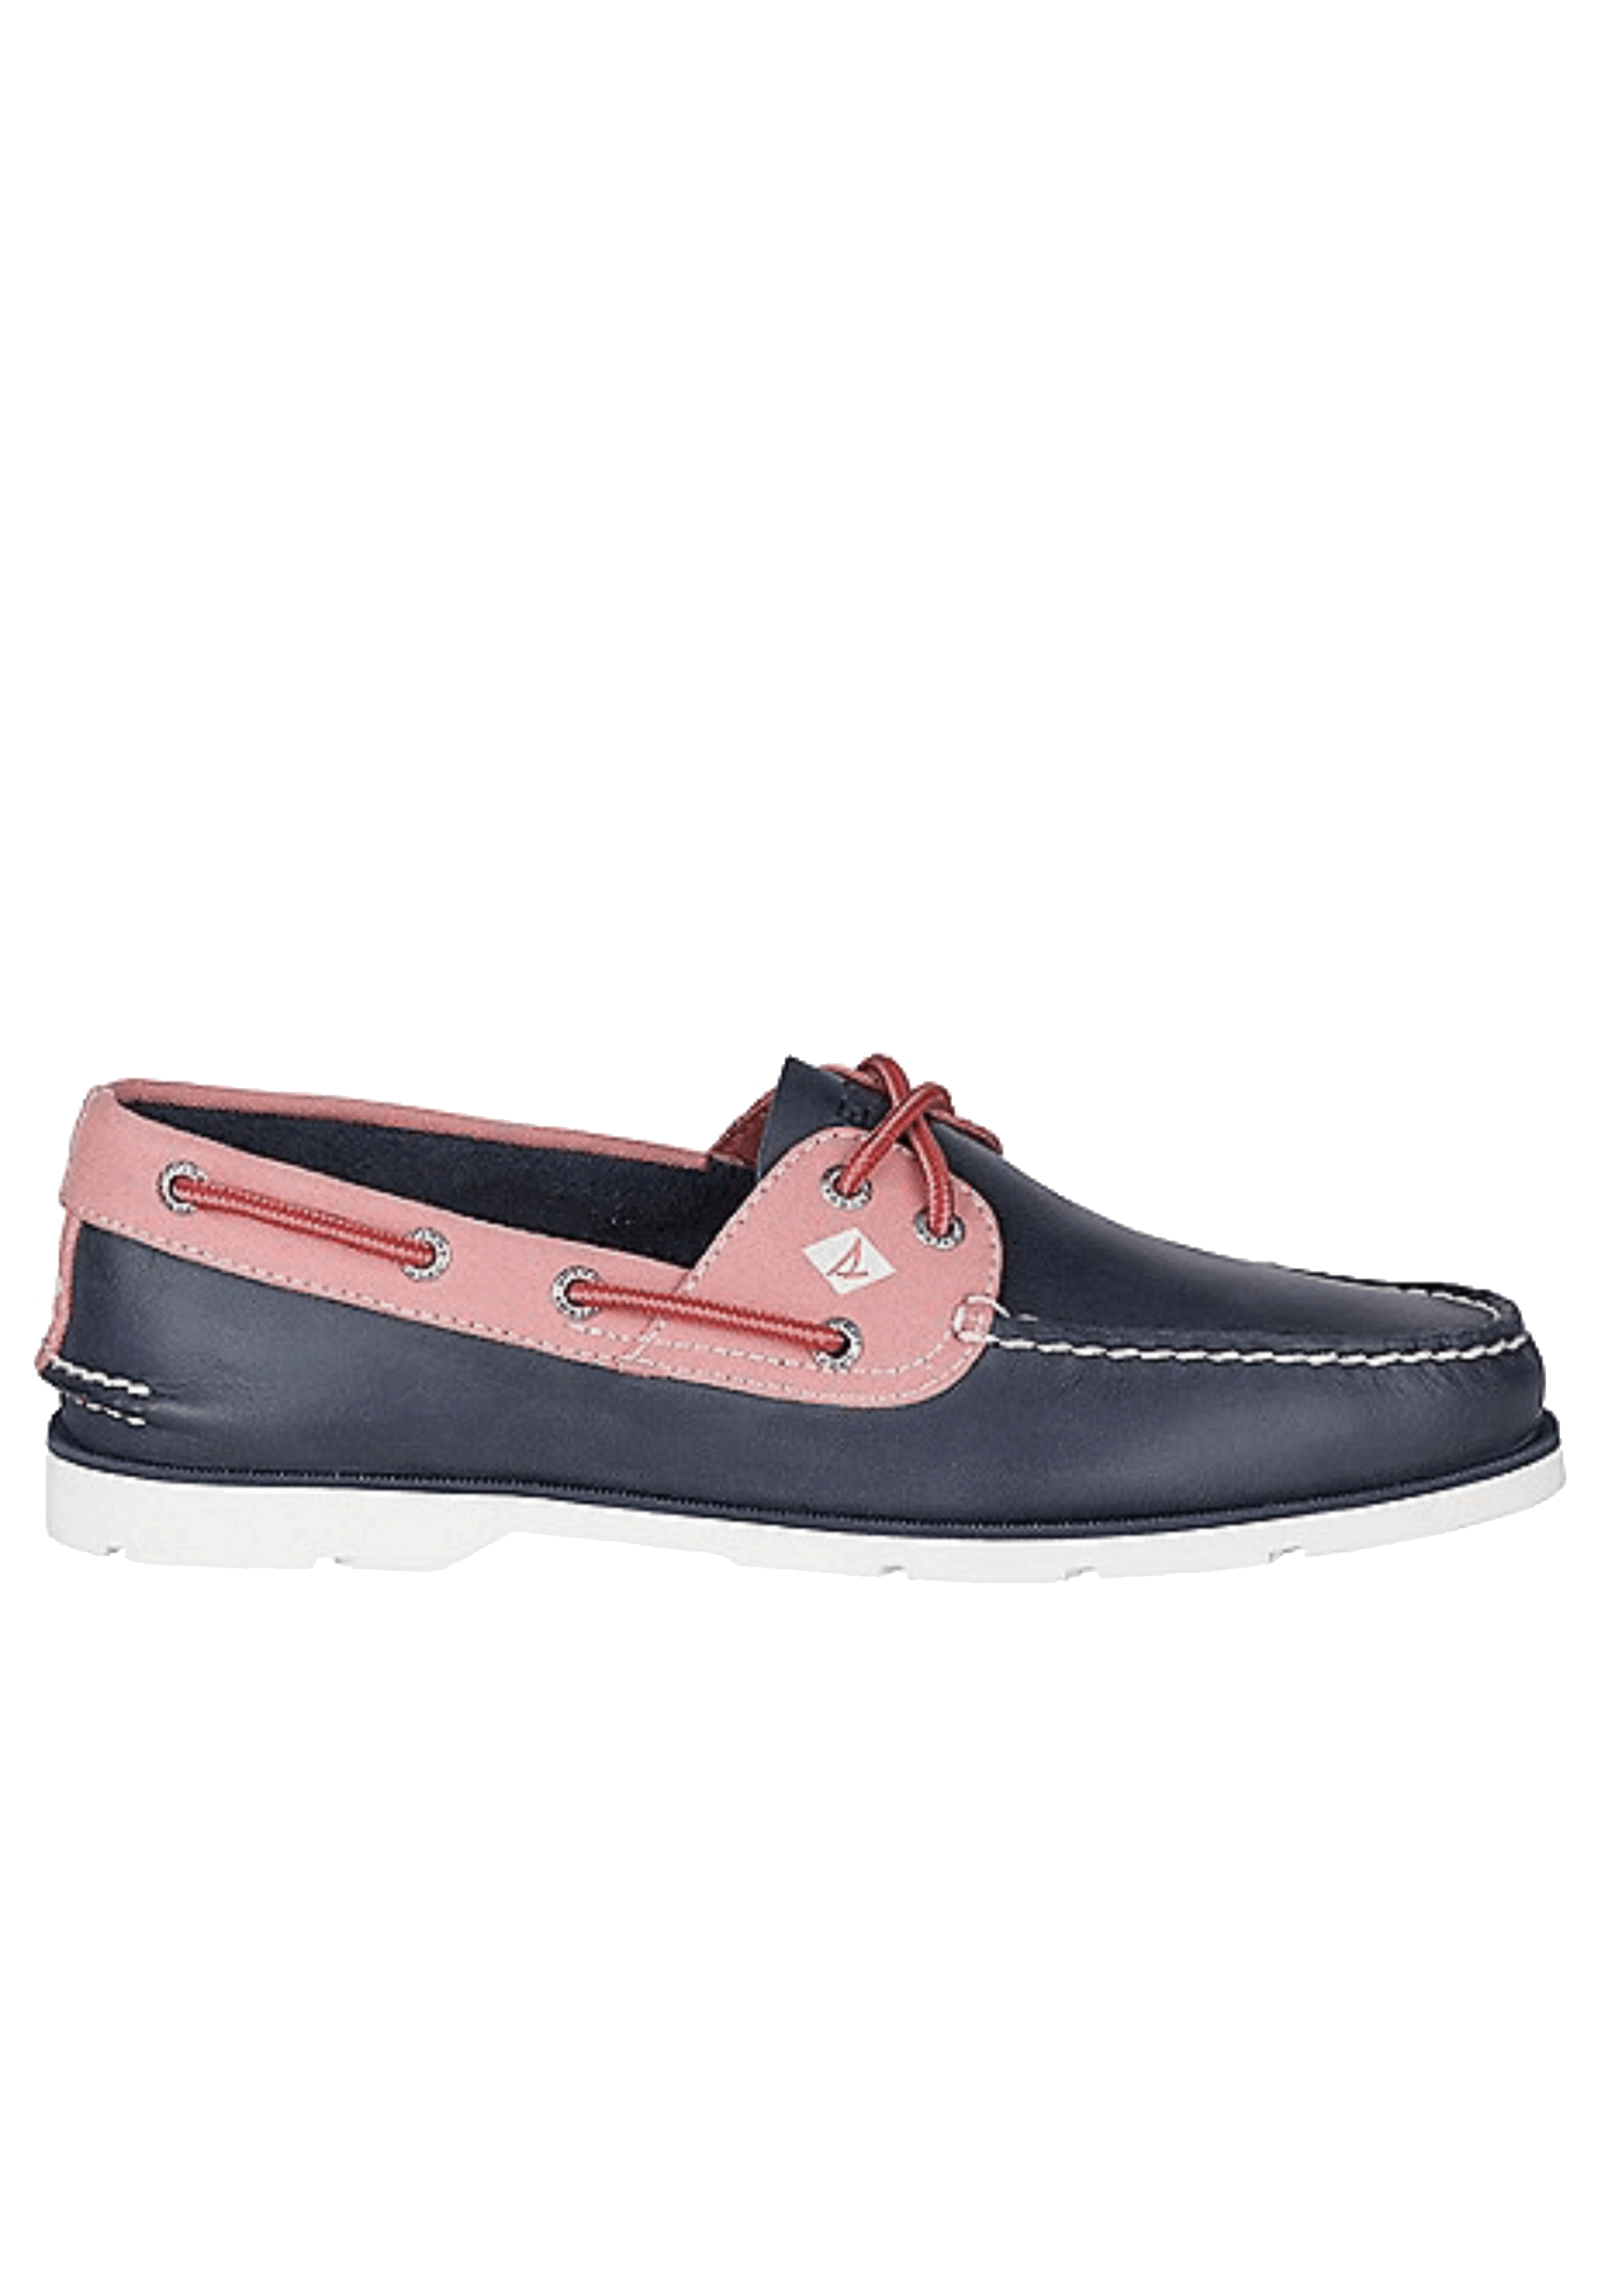 Sperry Pink Navy Leather Boat Shoes - Selection Coste